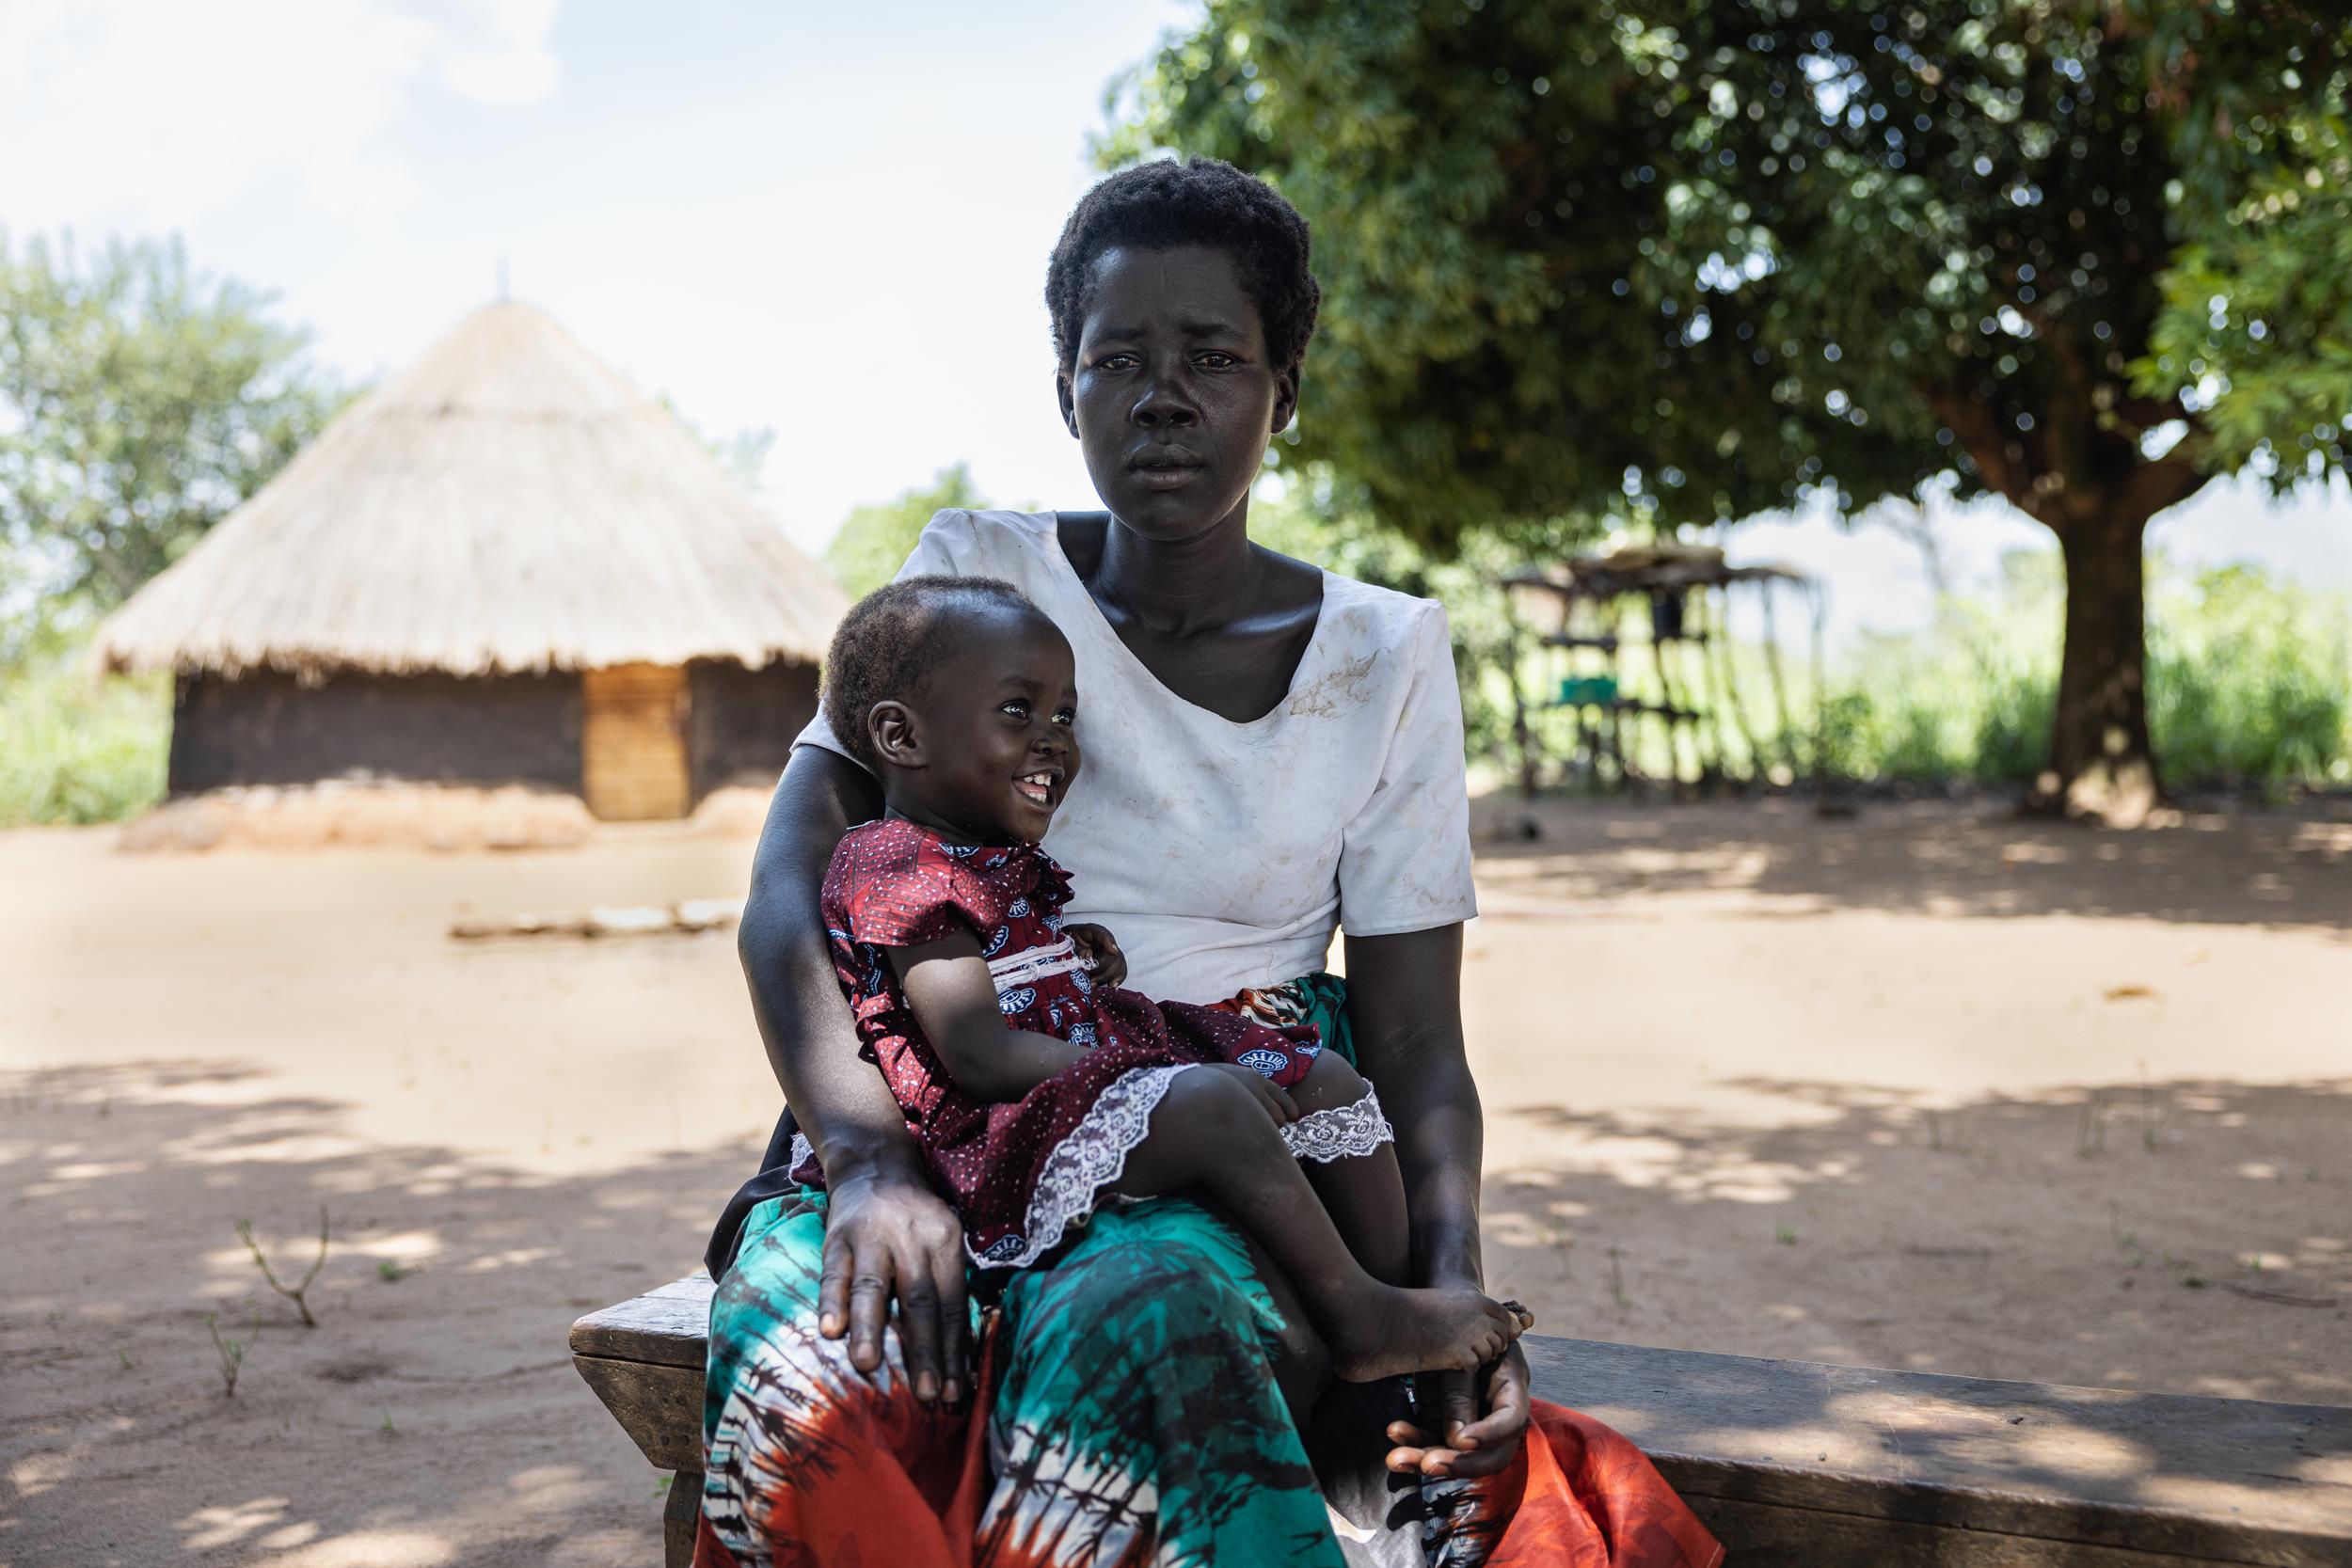 A Mother and his child in Palabek refugee settlement, Uganda, Africa